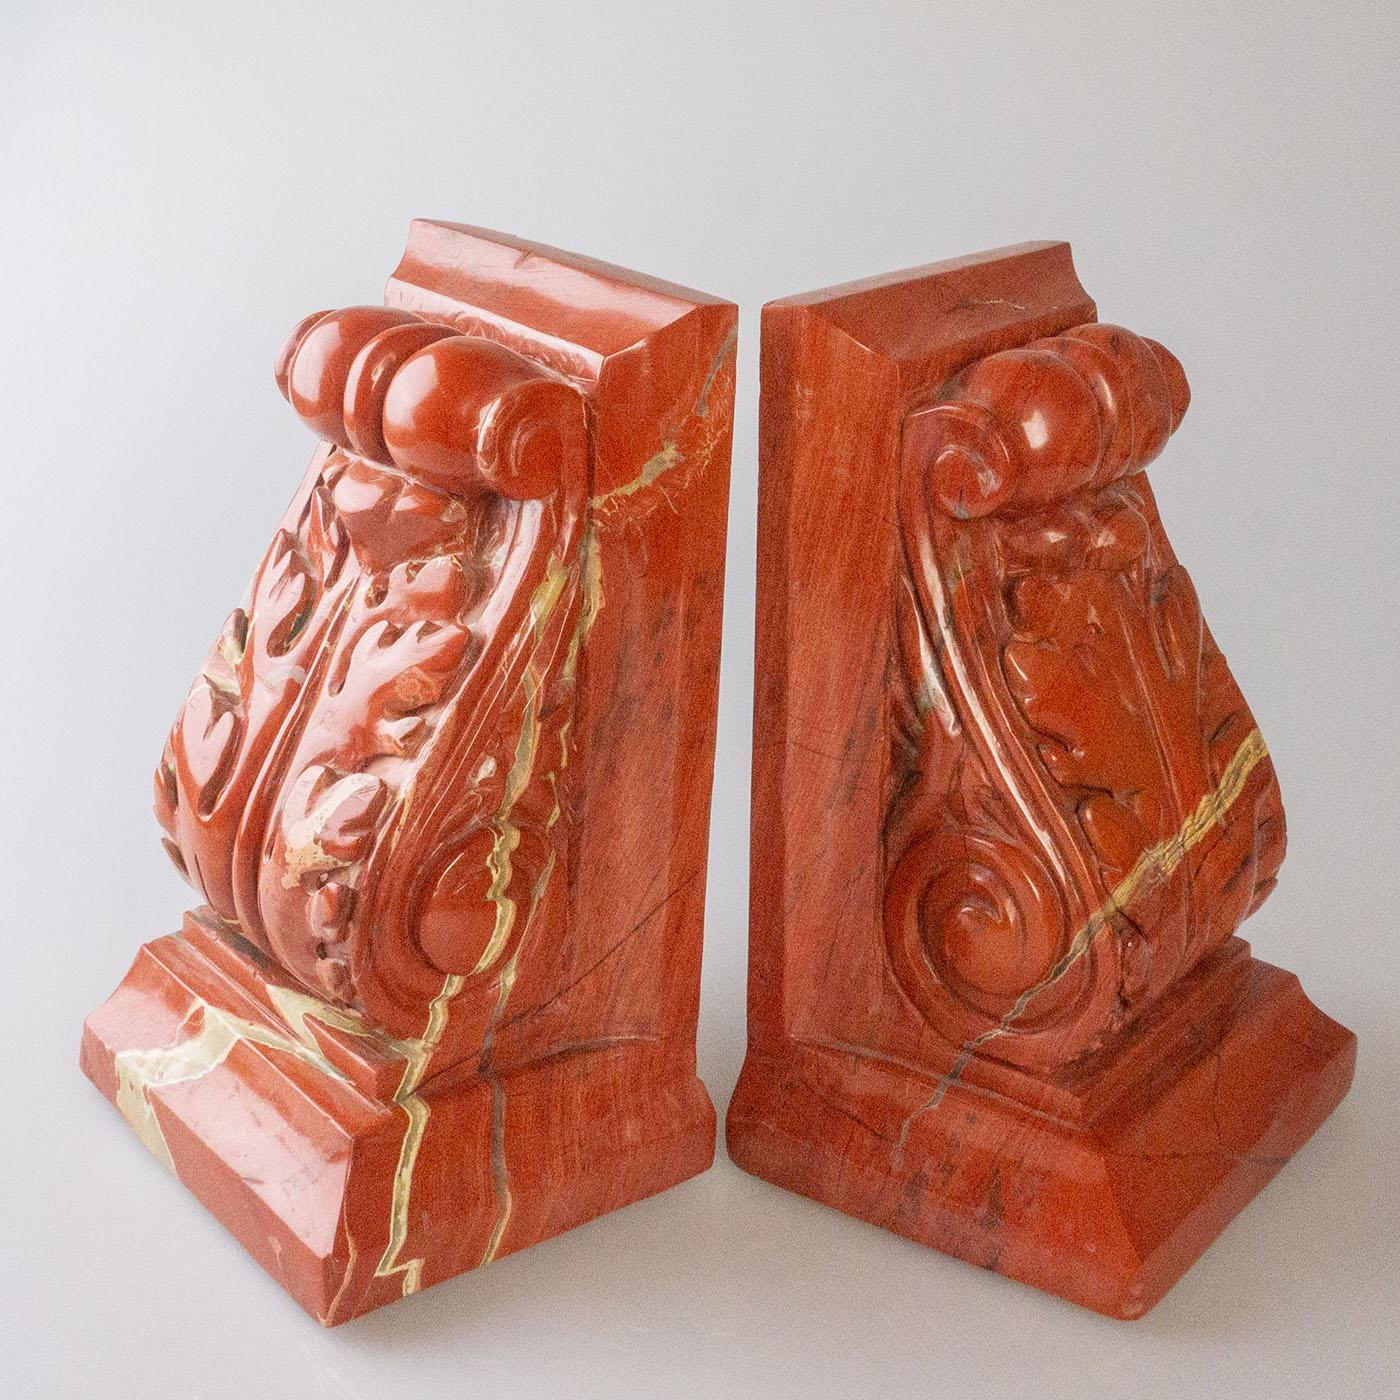 Pair of bookends made of solid red jasper, in the shape of a capital with acanthus leaves.